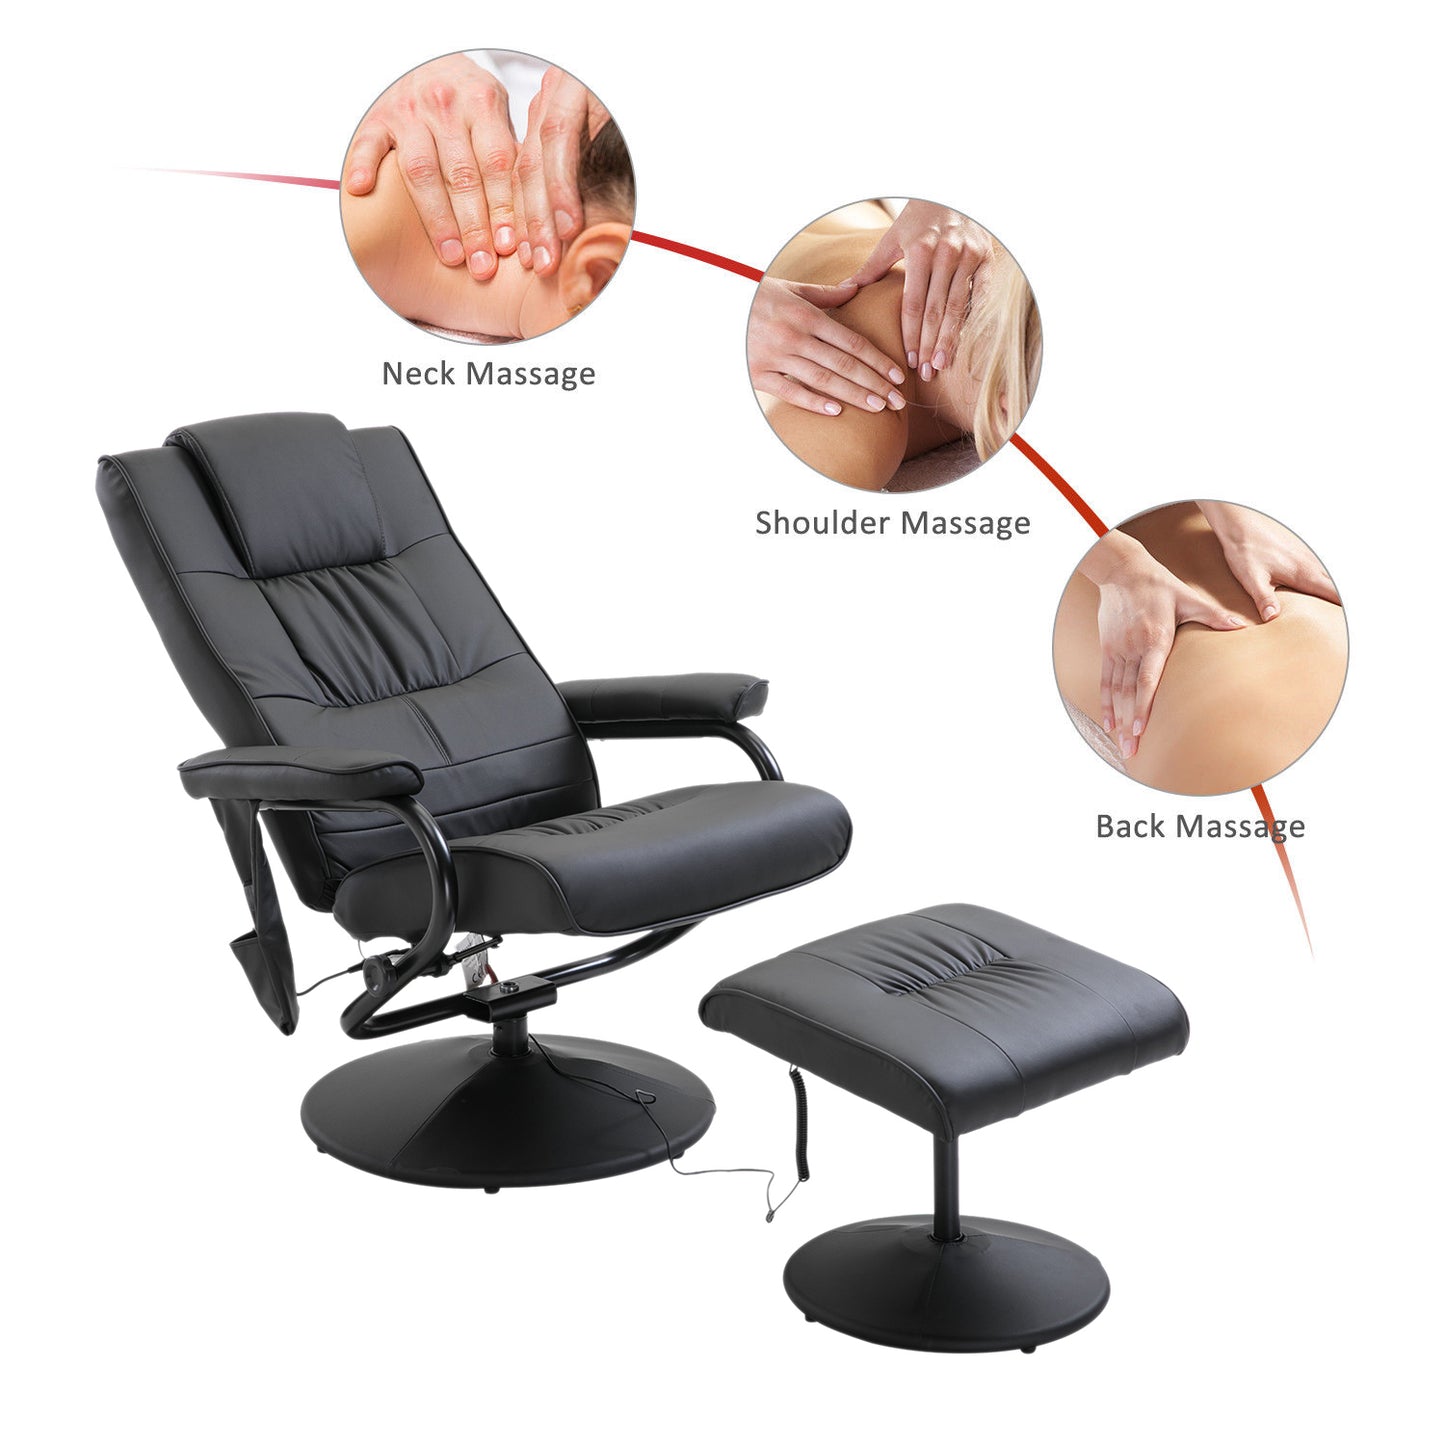 HOMCOM 10 - Point Reclining Massage Chair Faux Leather Armchair Chair W/Footstool - Black